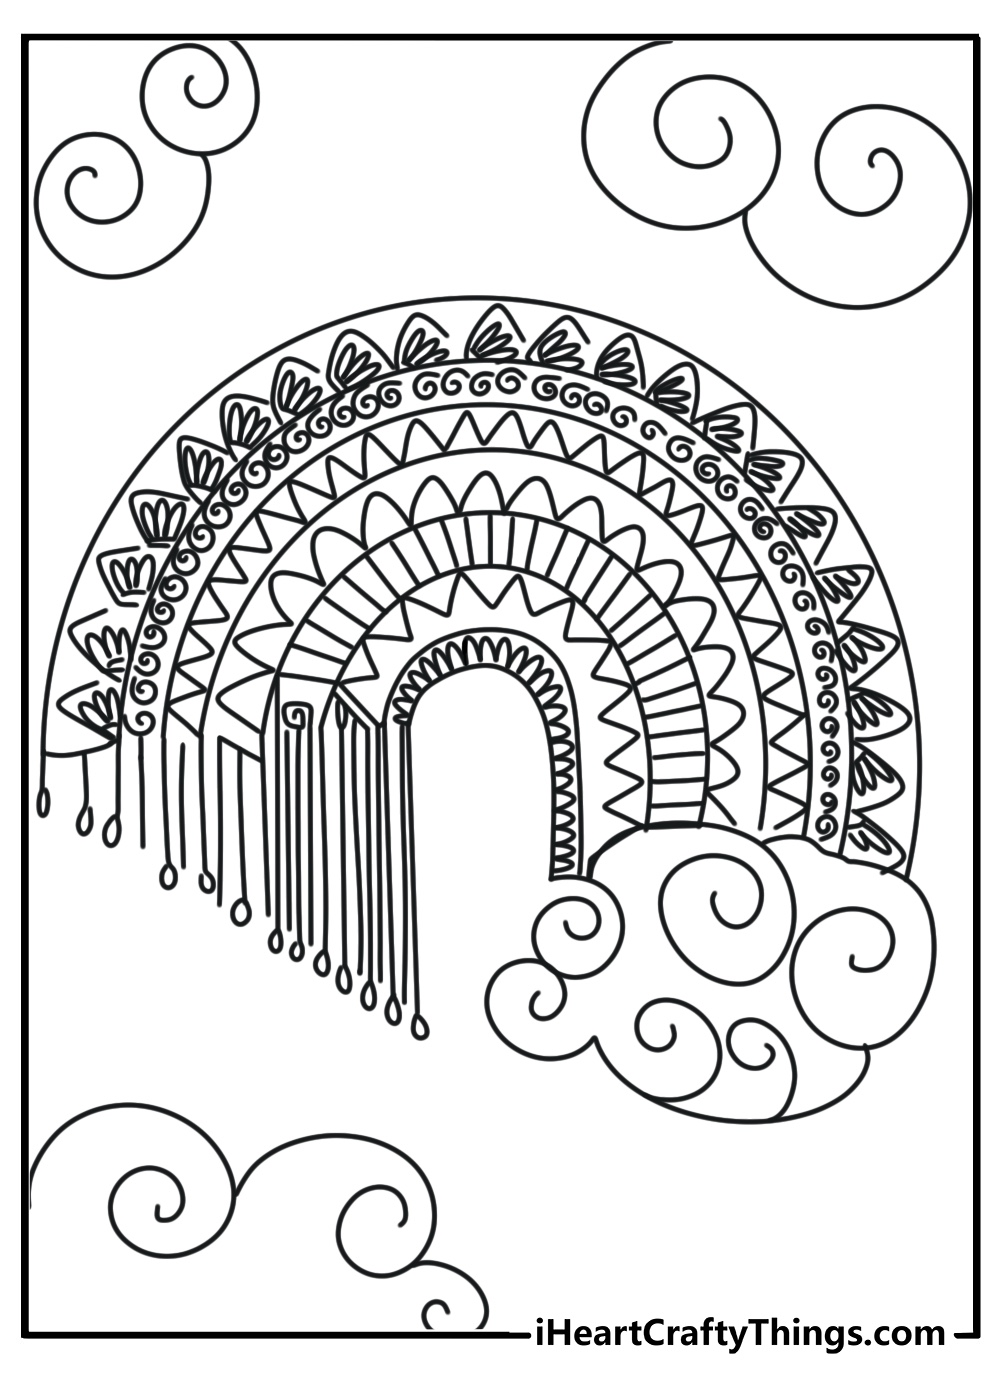 Cute rainbow zentangle coloring page